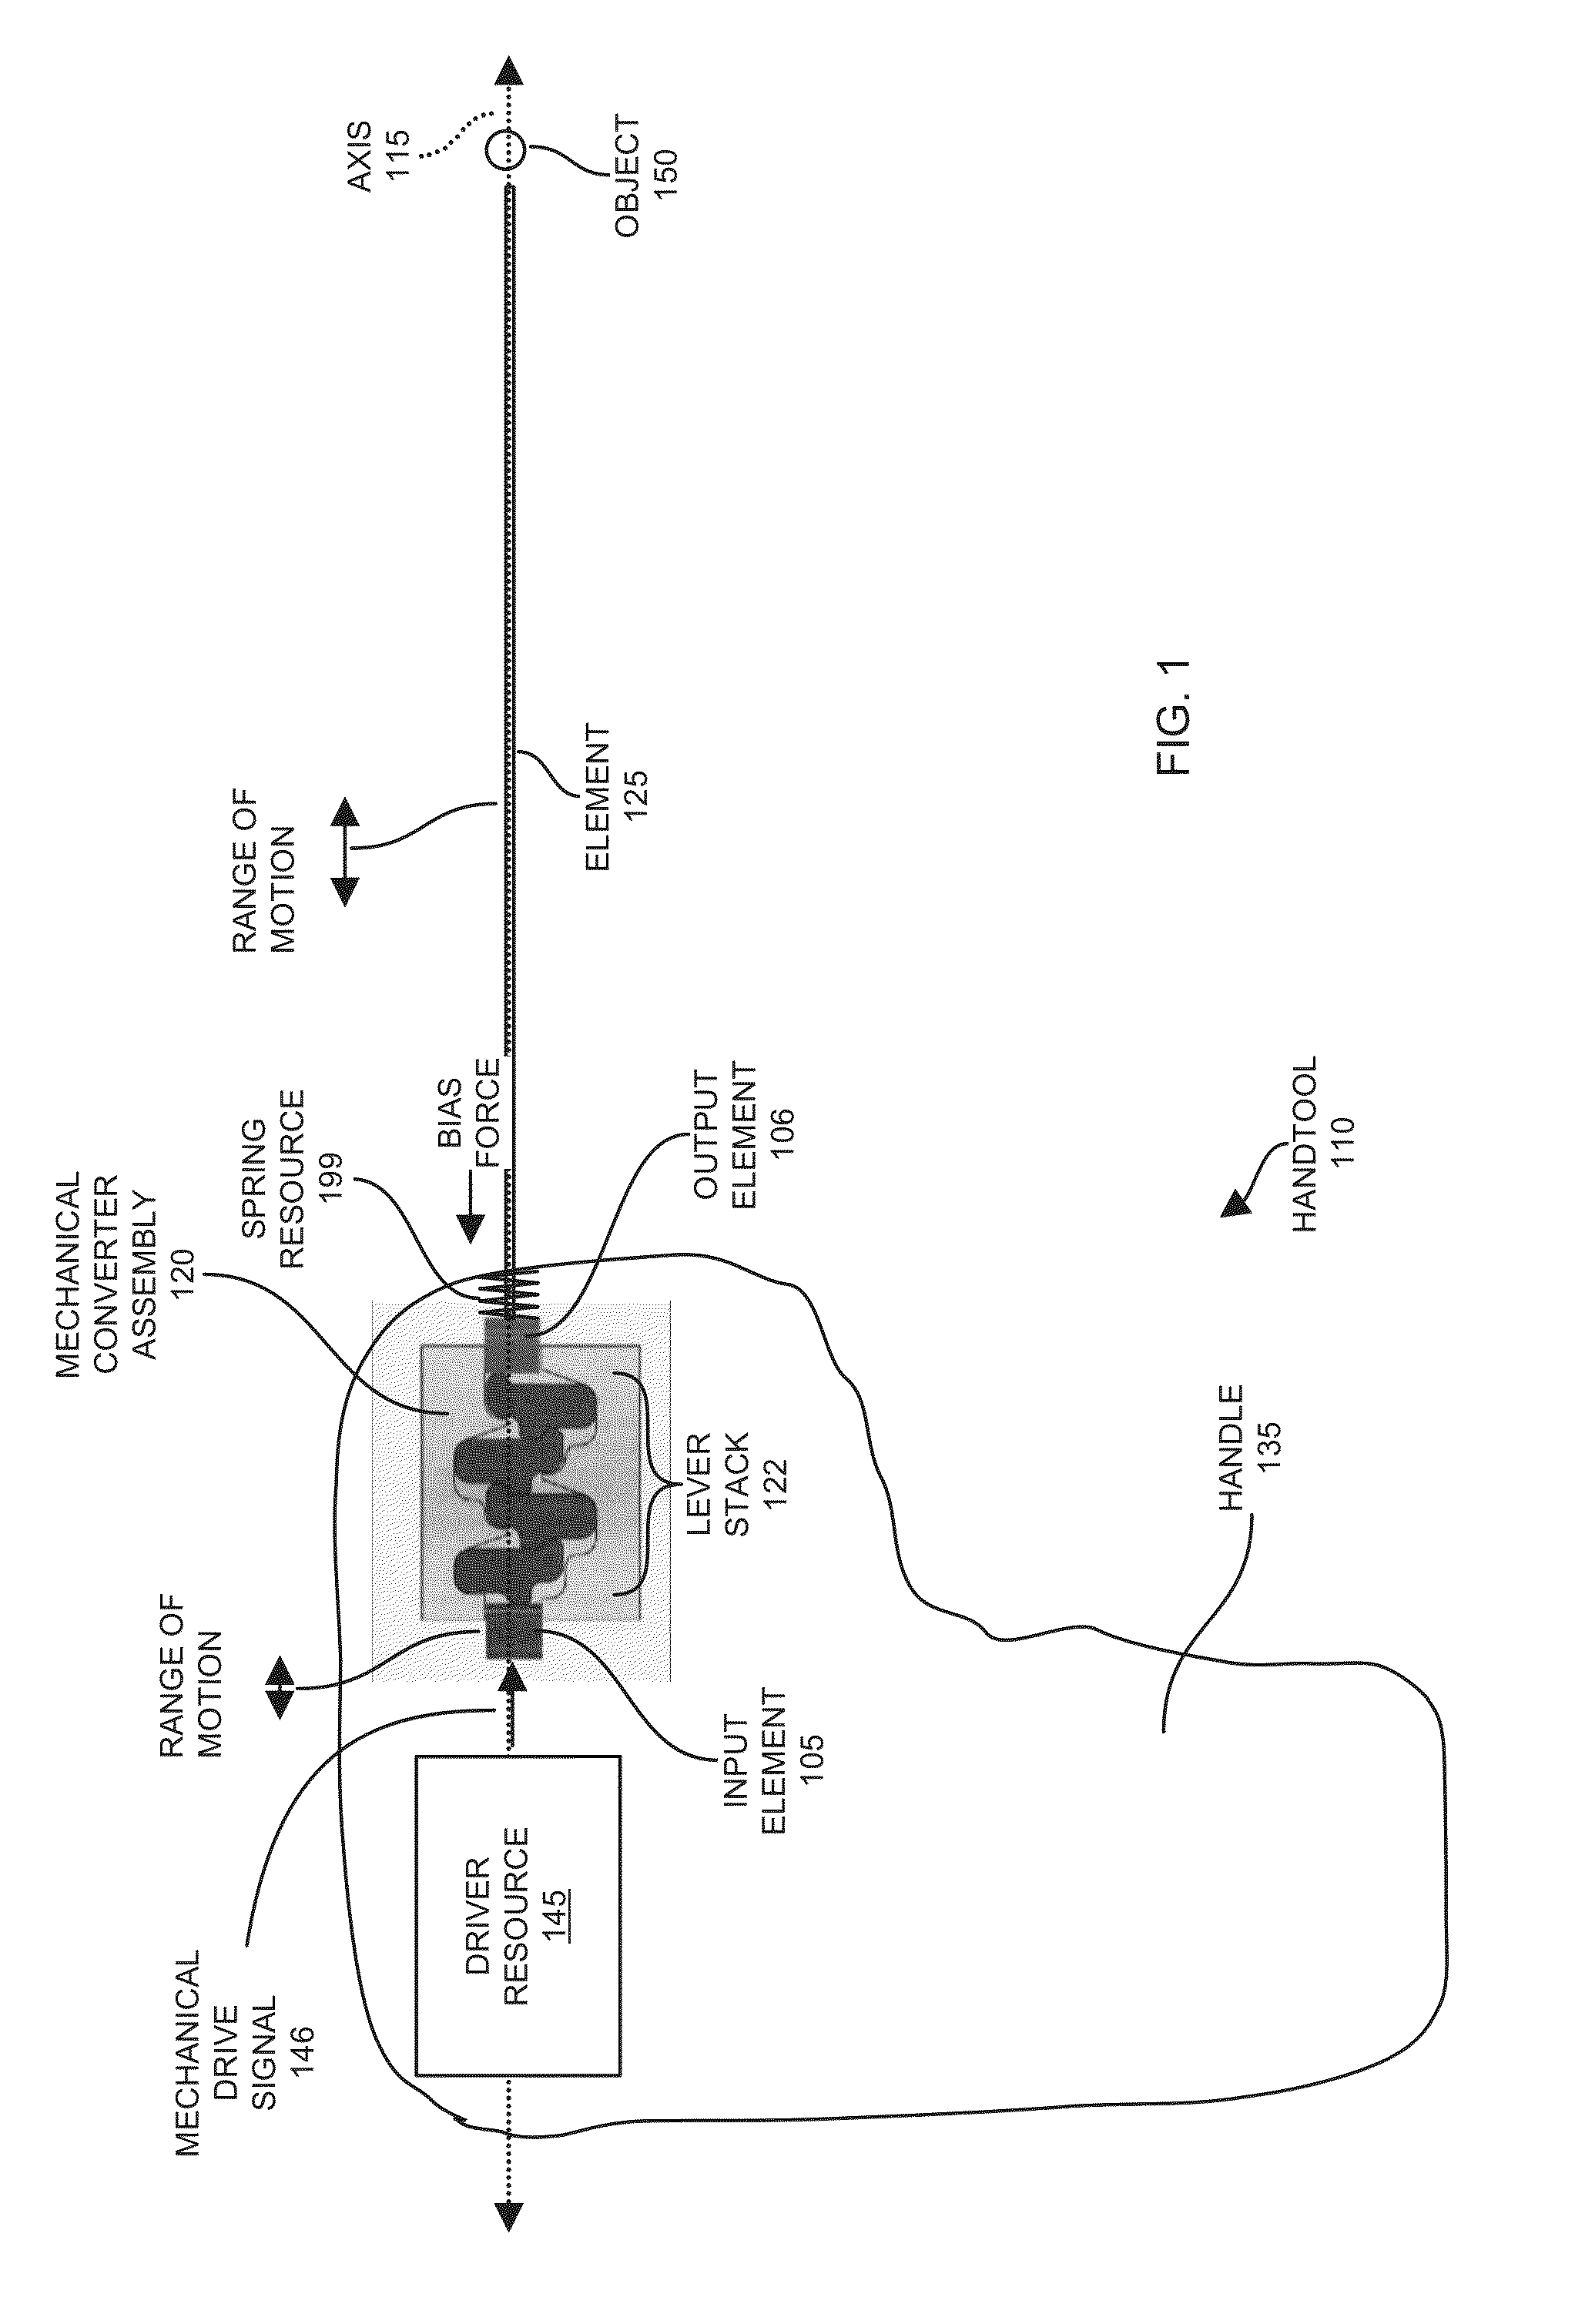 Mechanical converter assembly and implementations